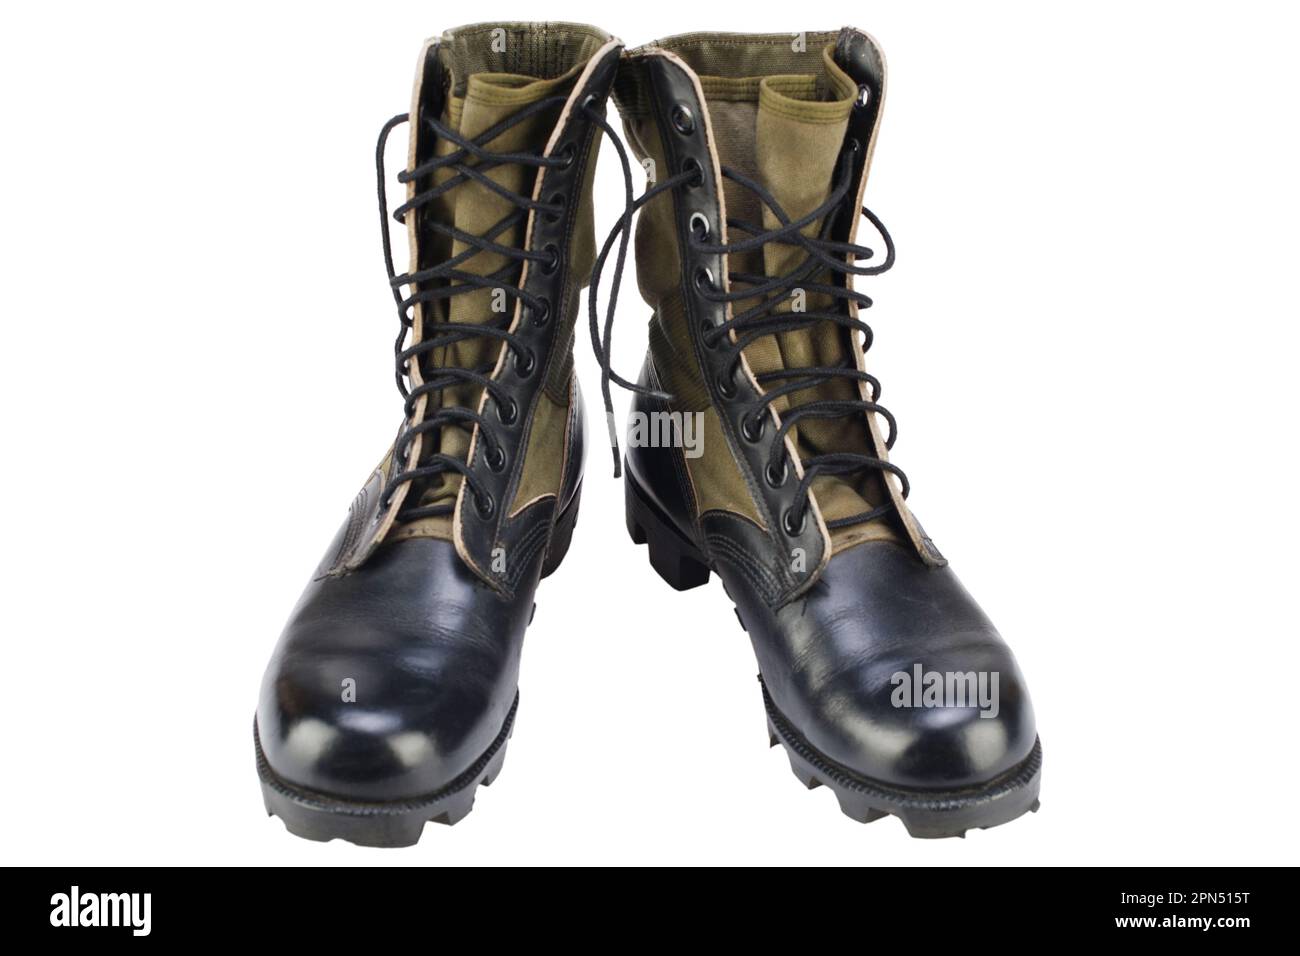 Vietnam war 1968. US army pattern jungle boots isolated on white background Stock Photo